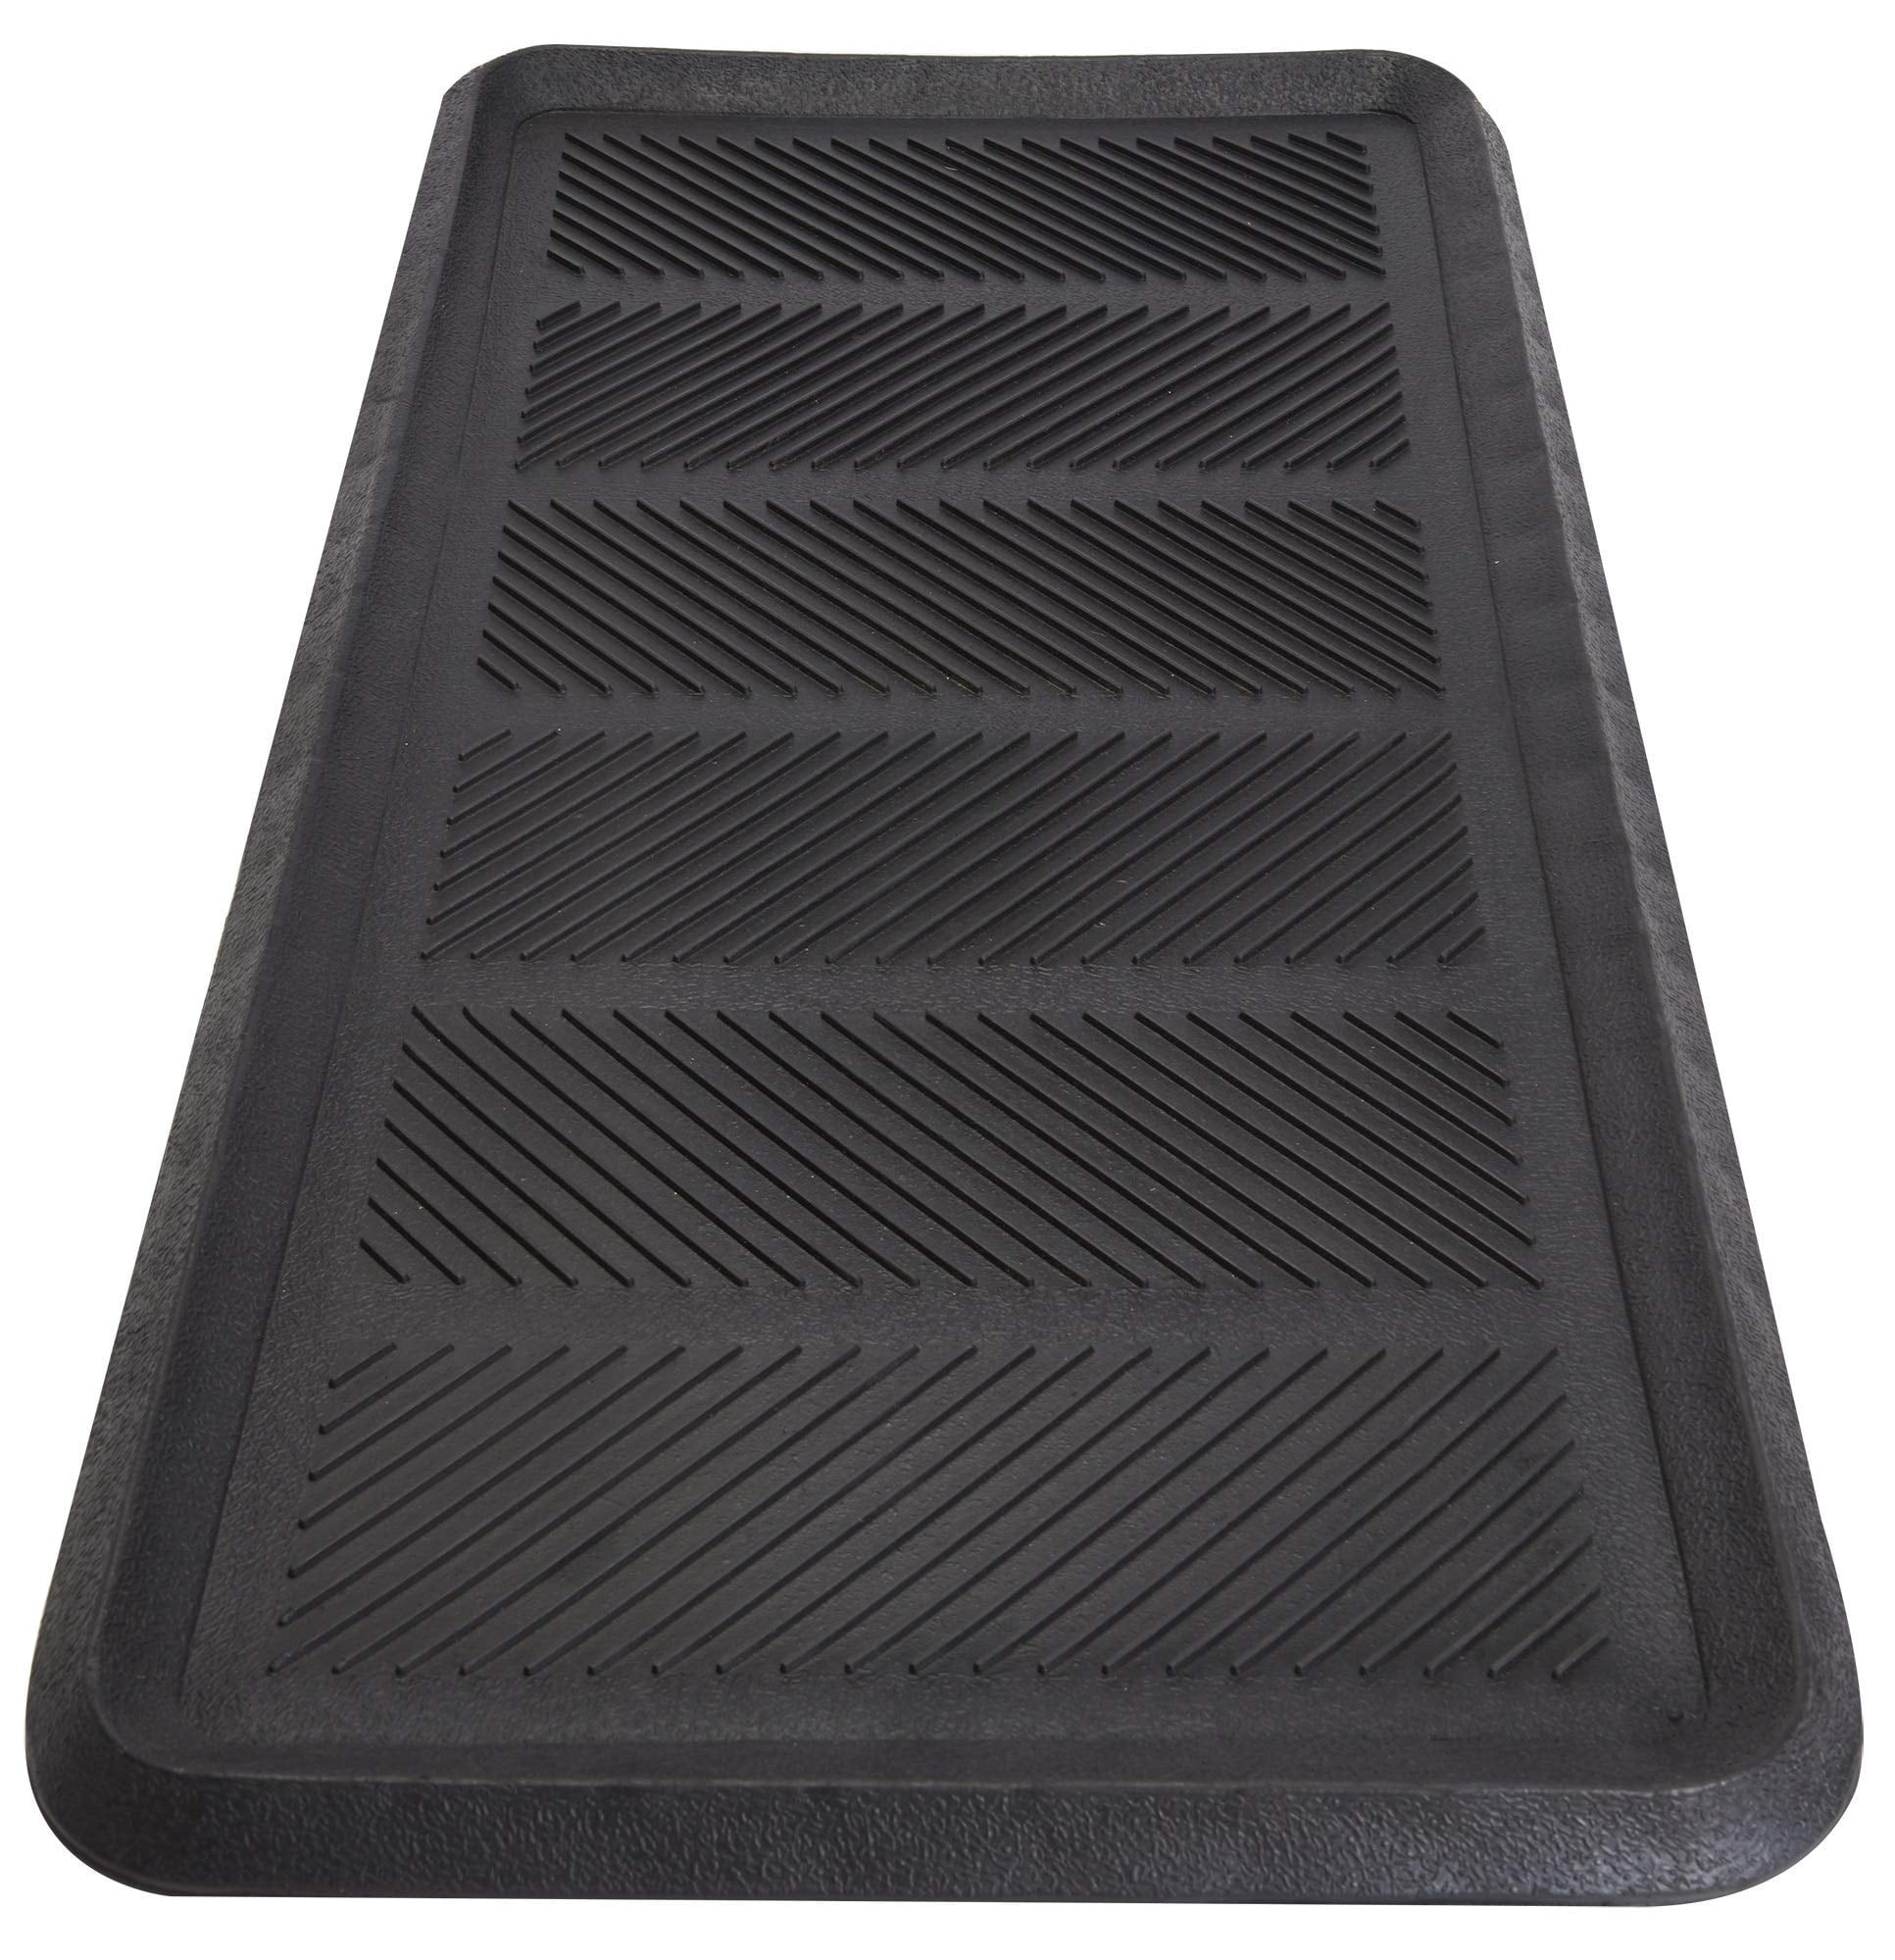  Envelor Rubber Boot Tray for Entryway Indoor Shoe